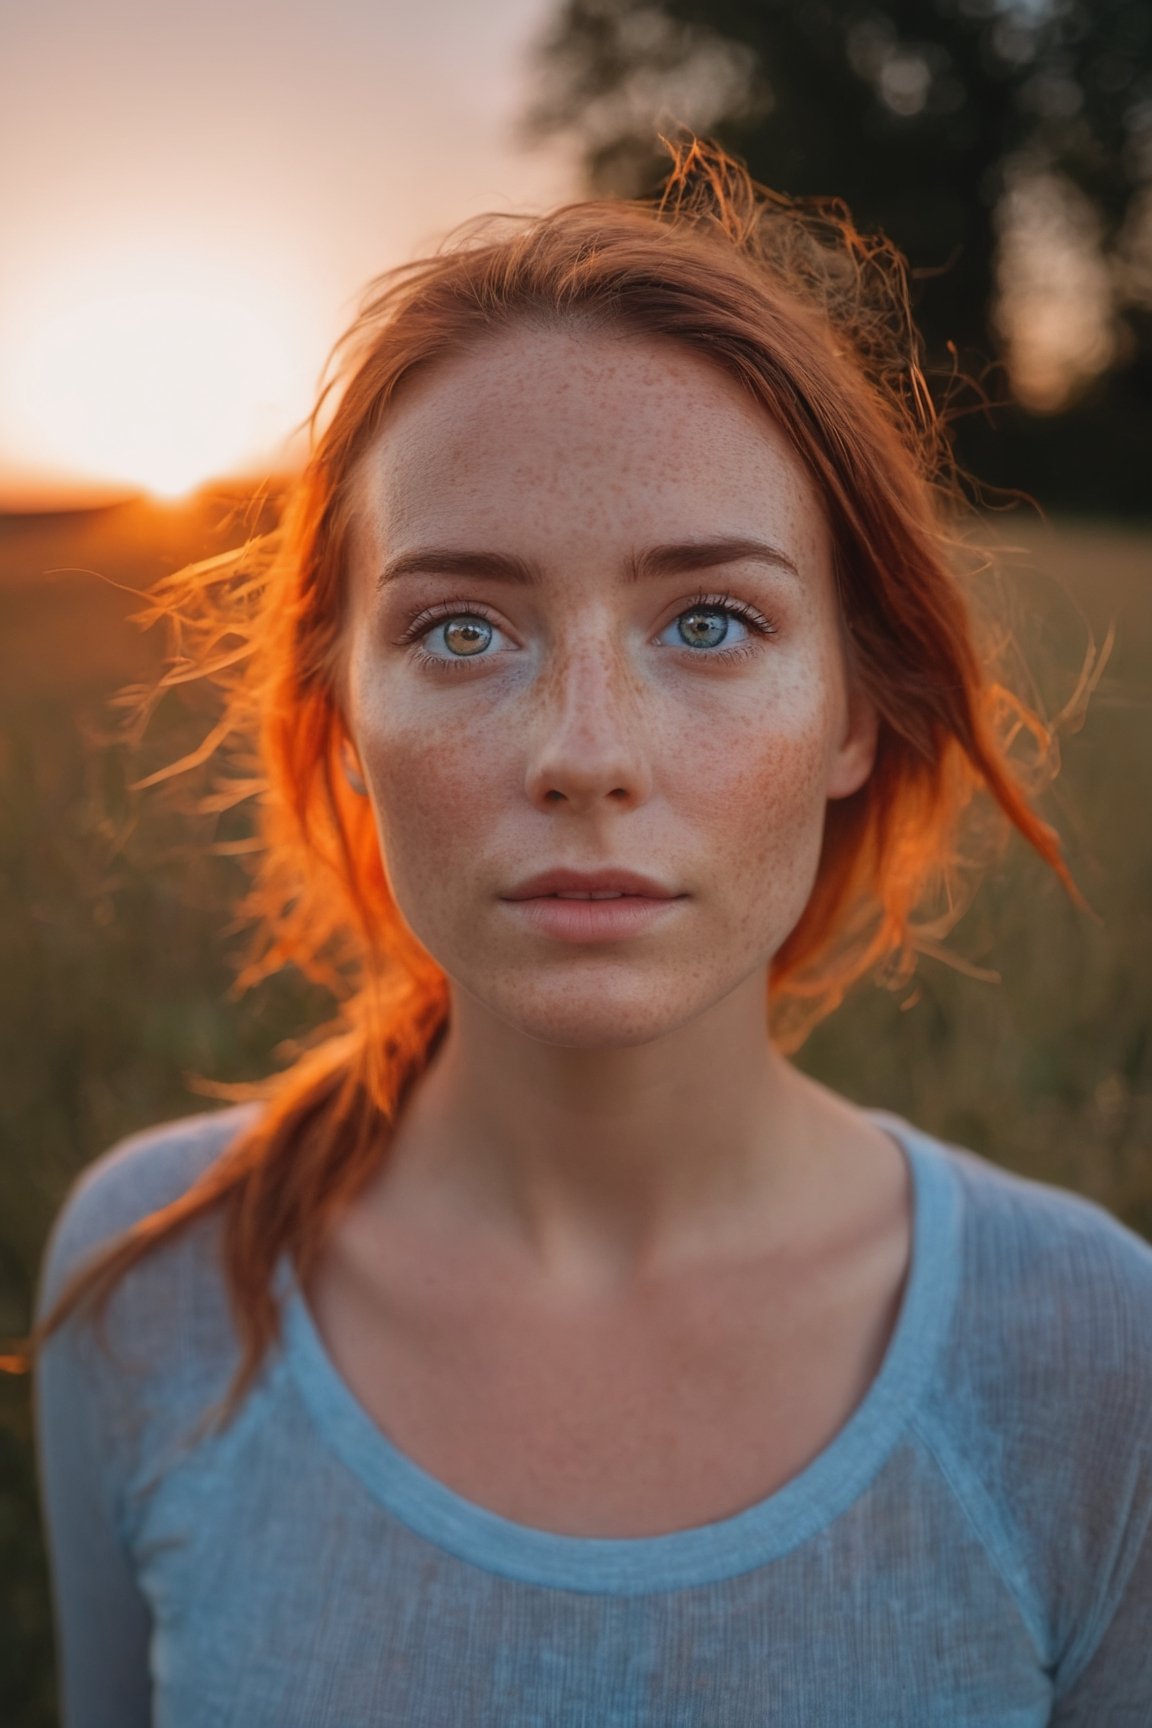 Portrait Photo by Tobias Stimmer, sunset glow around head, camera angle looking up at her, freckle, 4k post, red eyes glowing, 300mm, orange and blue, my pov